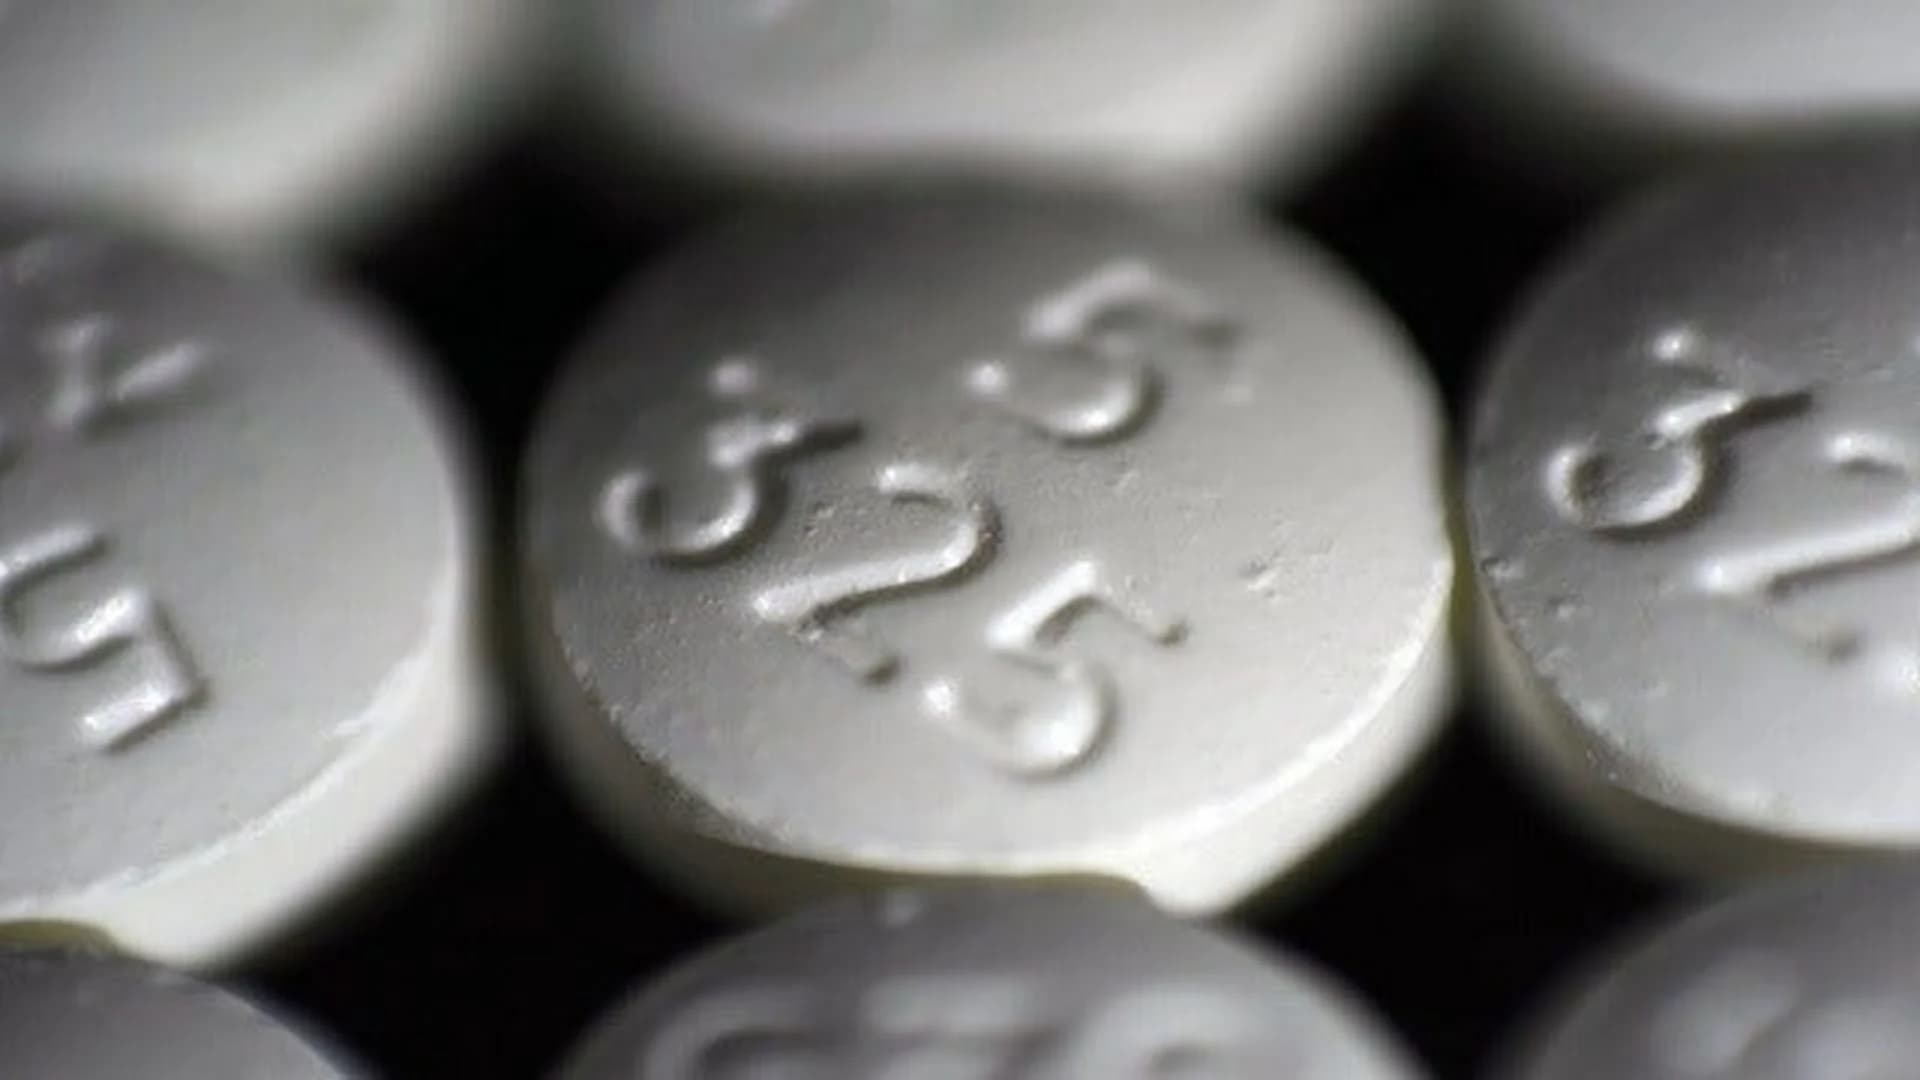 Walmart offers way to turn leftover opioids into useless gel